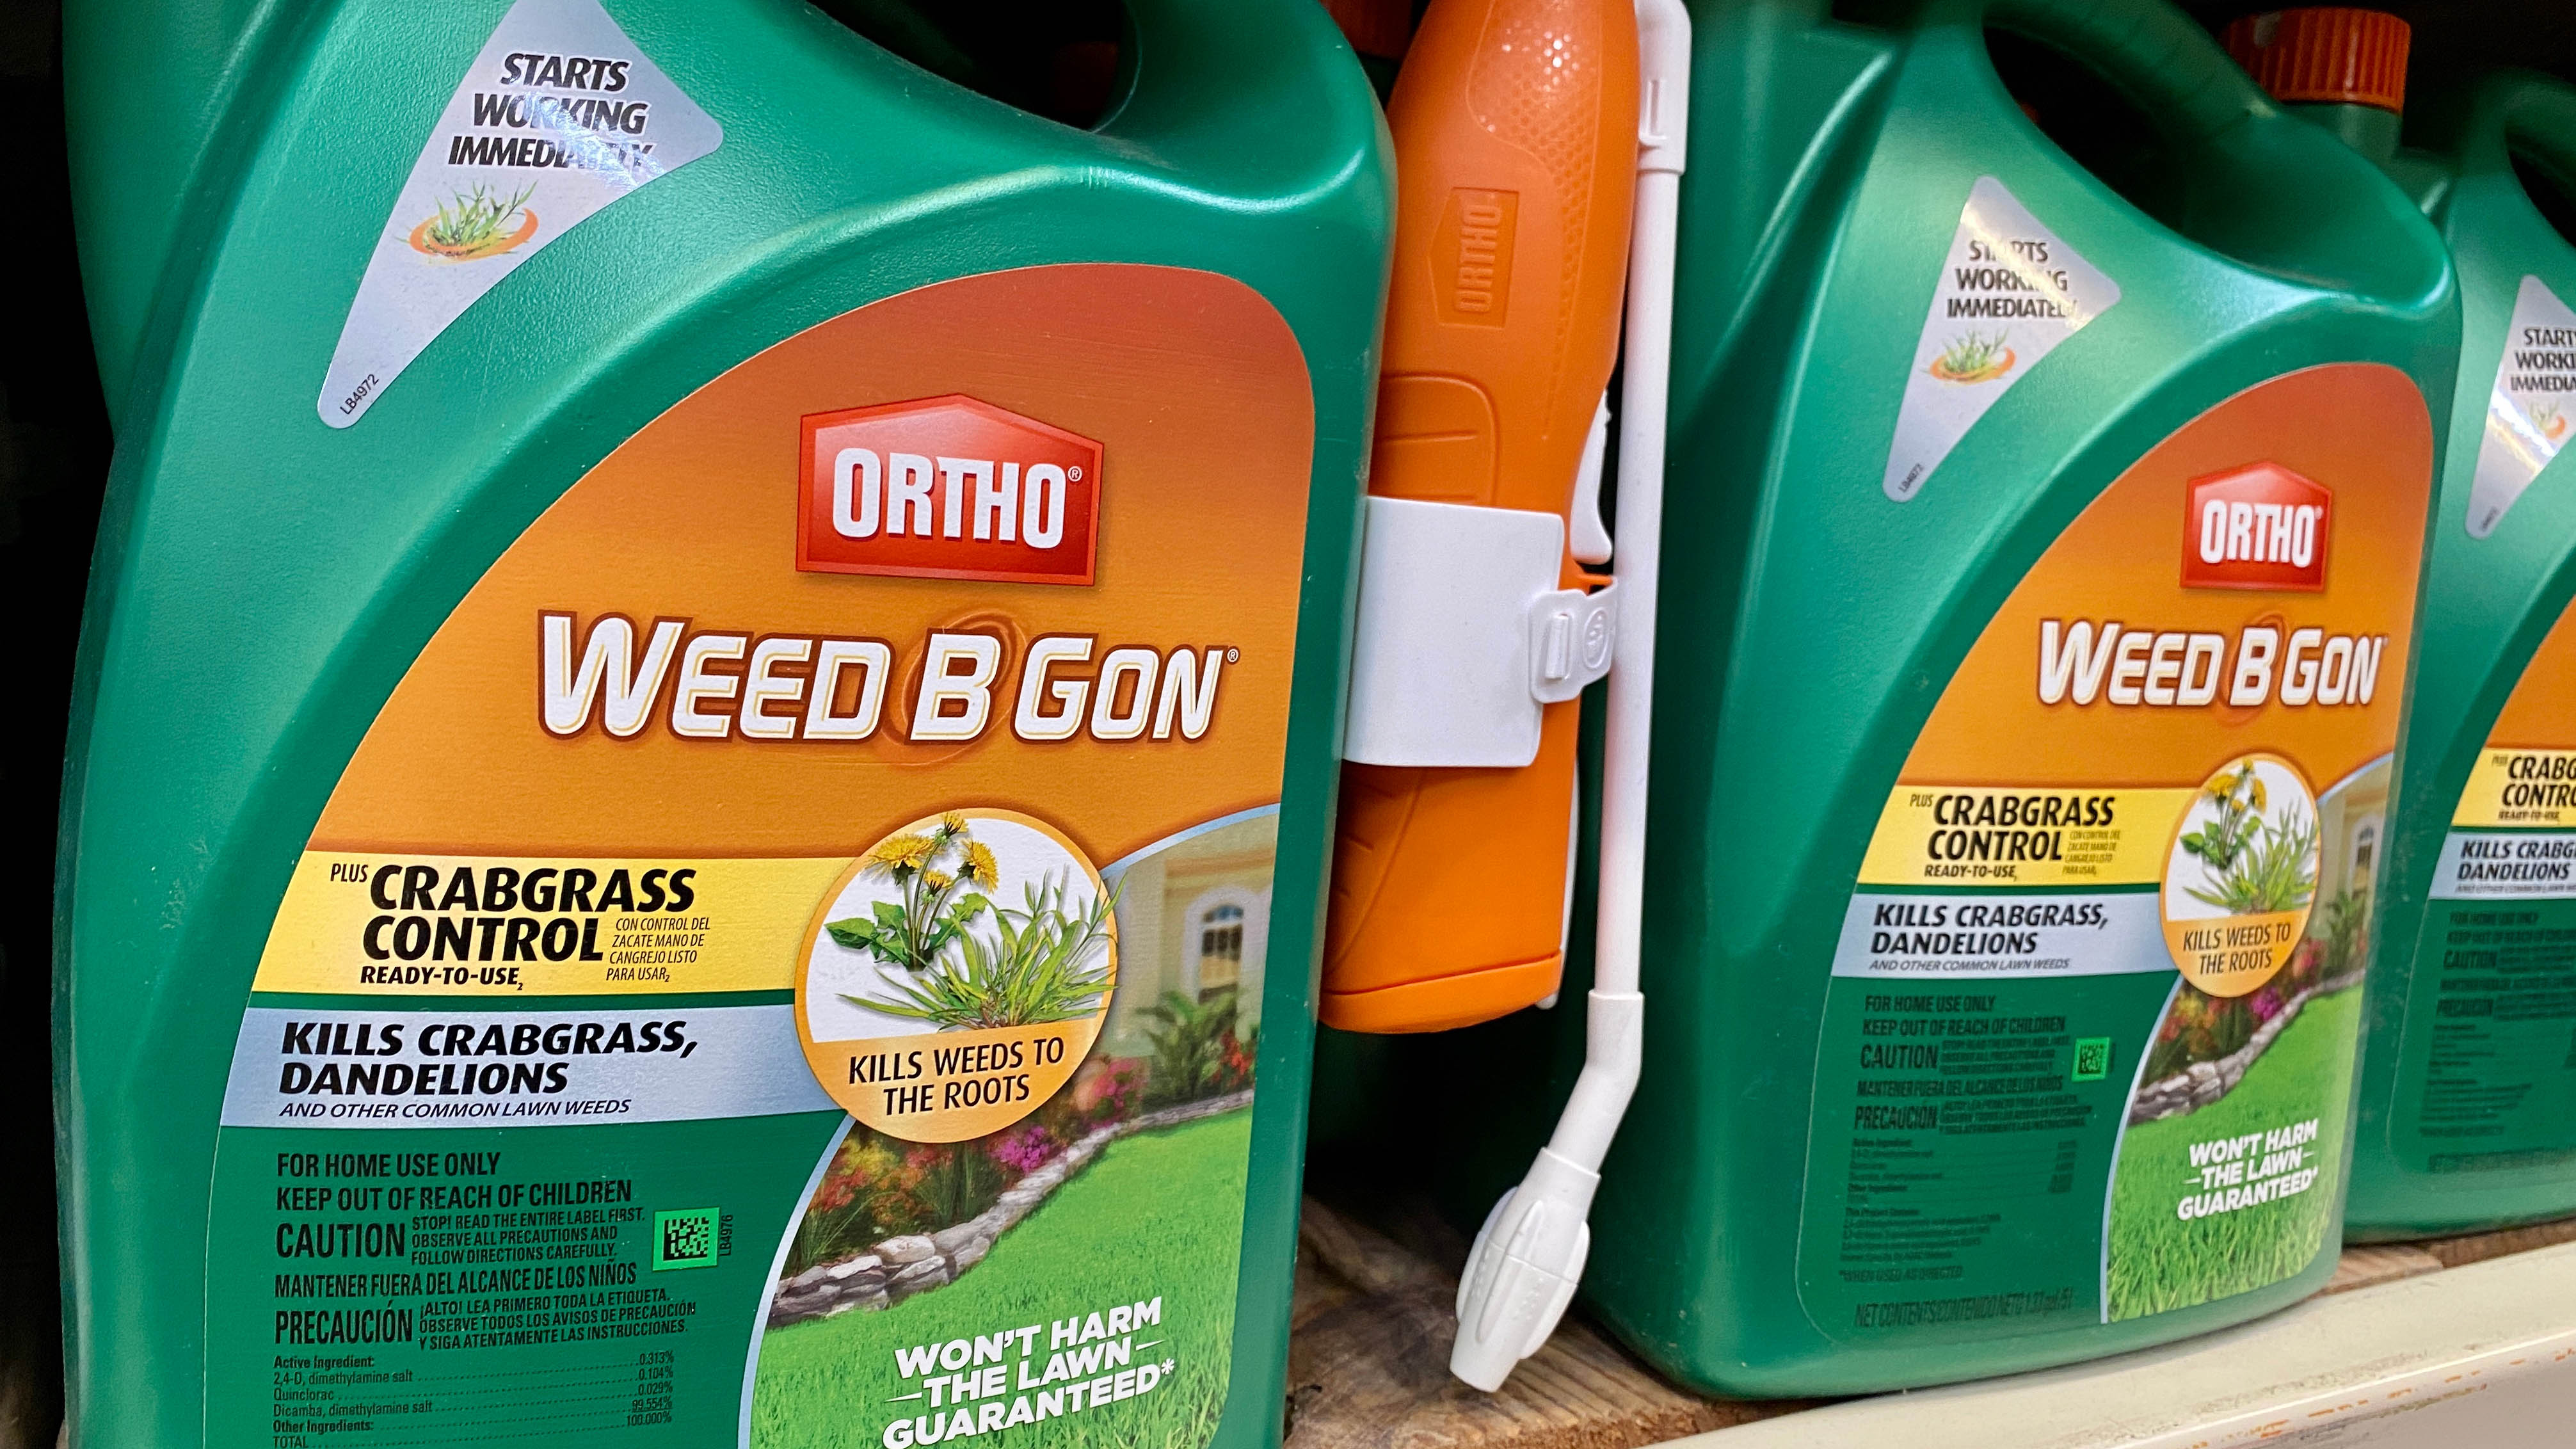 Two bottles of post-emergent herbicide designed to kill crabgrass without harming the lawn